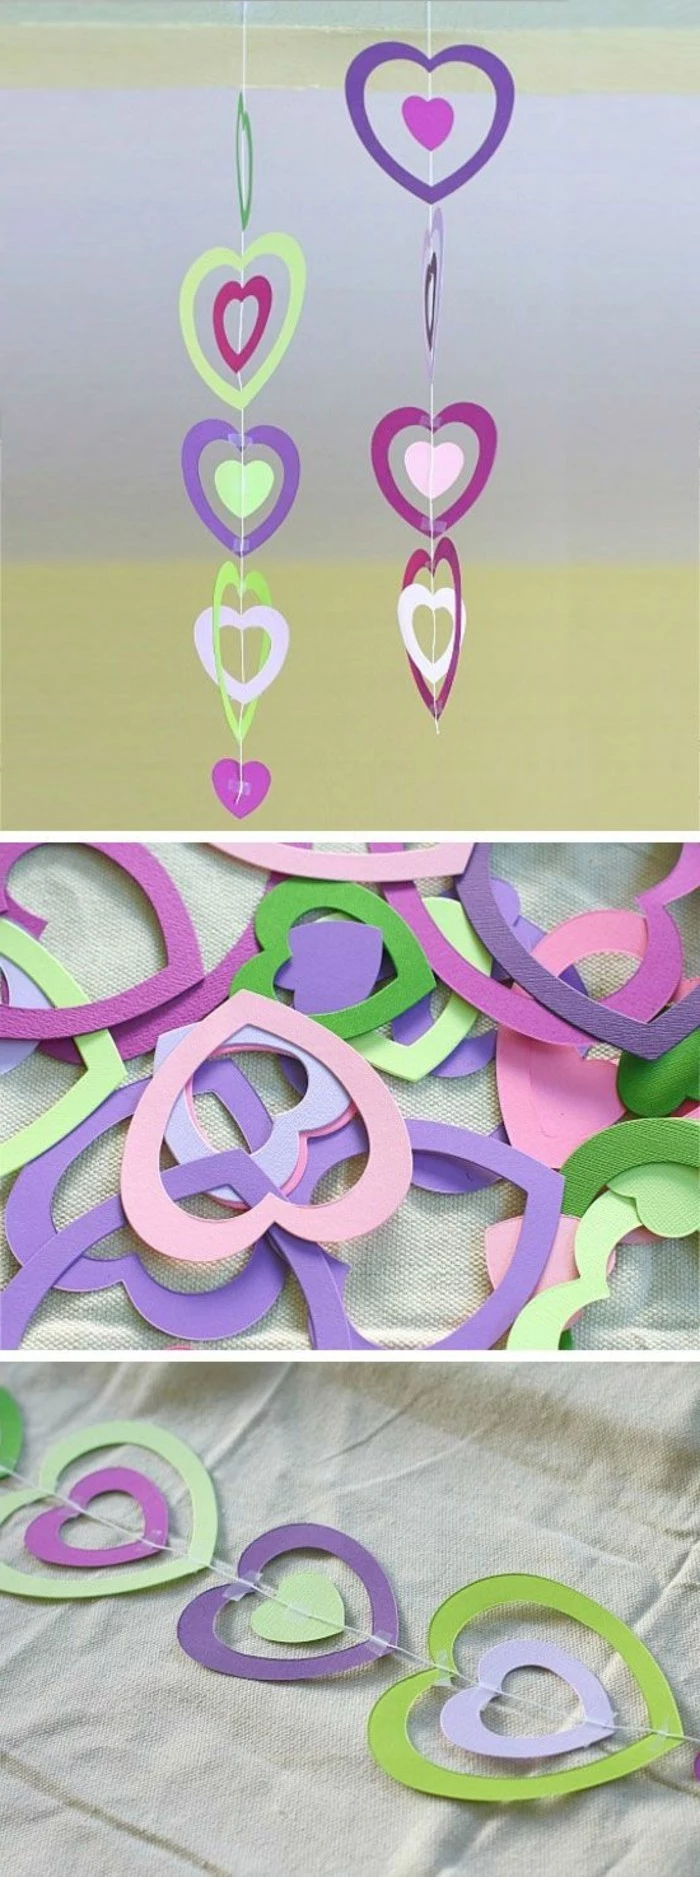 two garlands made from paper hearts, in different shades of pink, green and violet, attached together with white string and tape, close up of the garlands